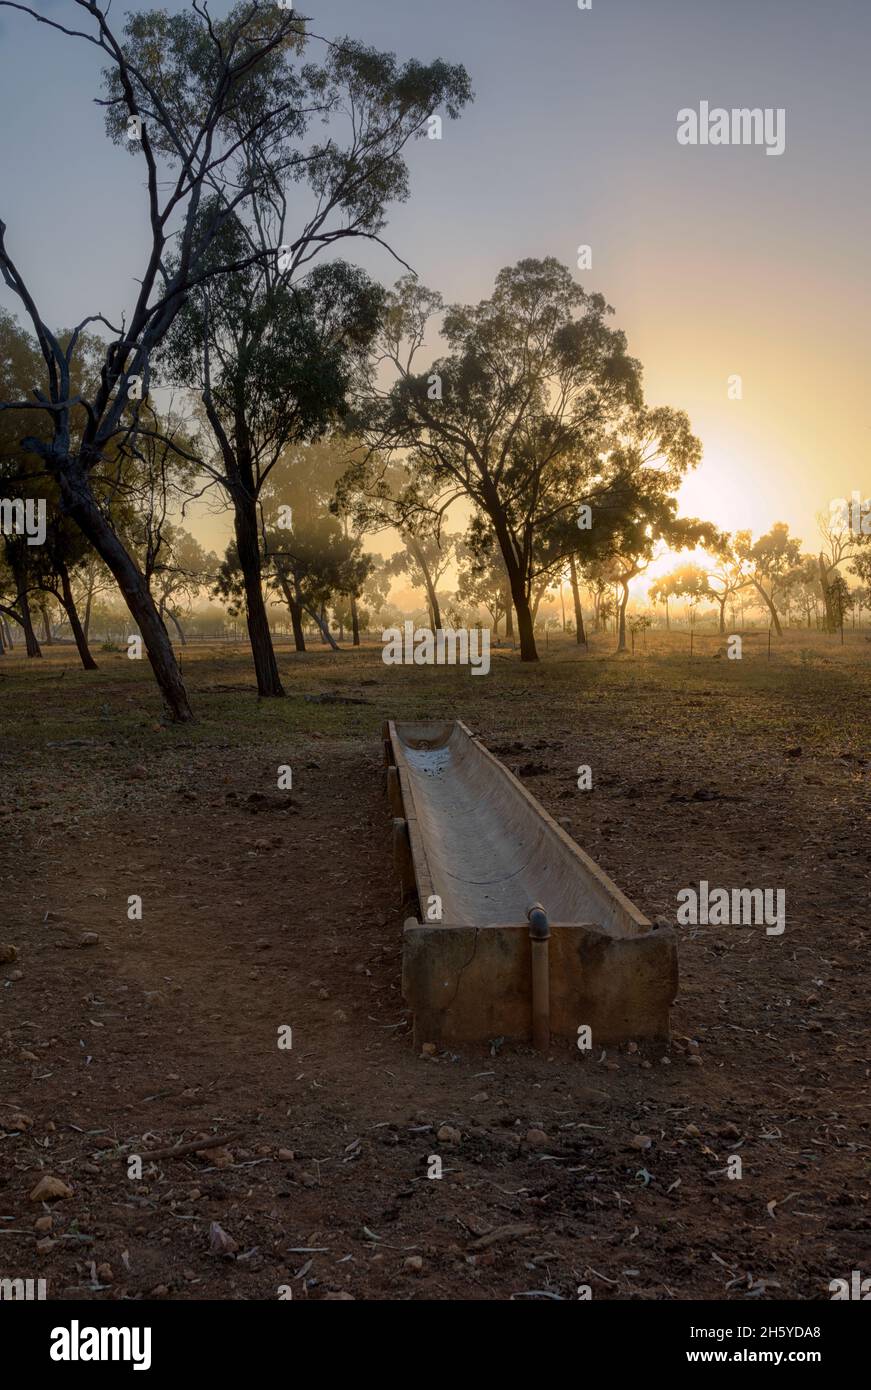 An empty concrete feed trough points at trees surrounded by a cold misty morning on a western Queensland property  in outback Australia. Stock Photo